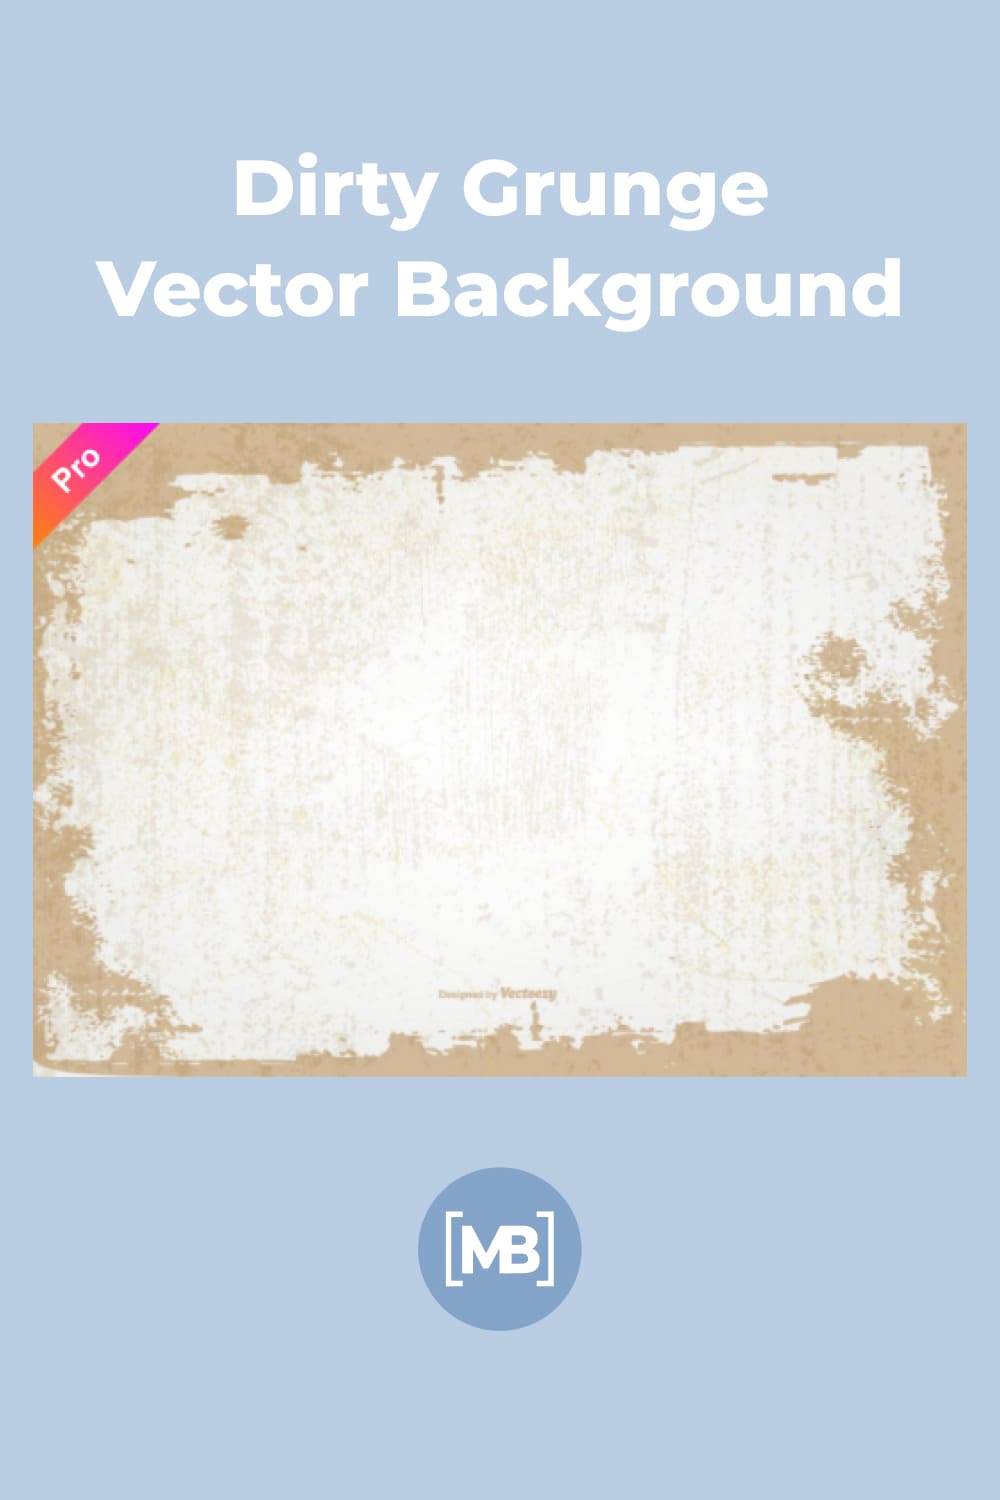 Dirty grunge vector background.